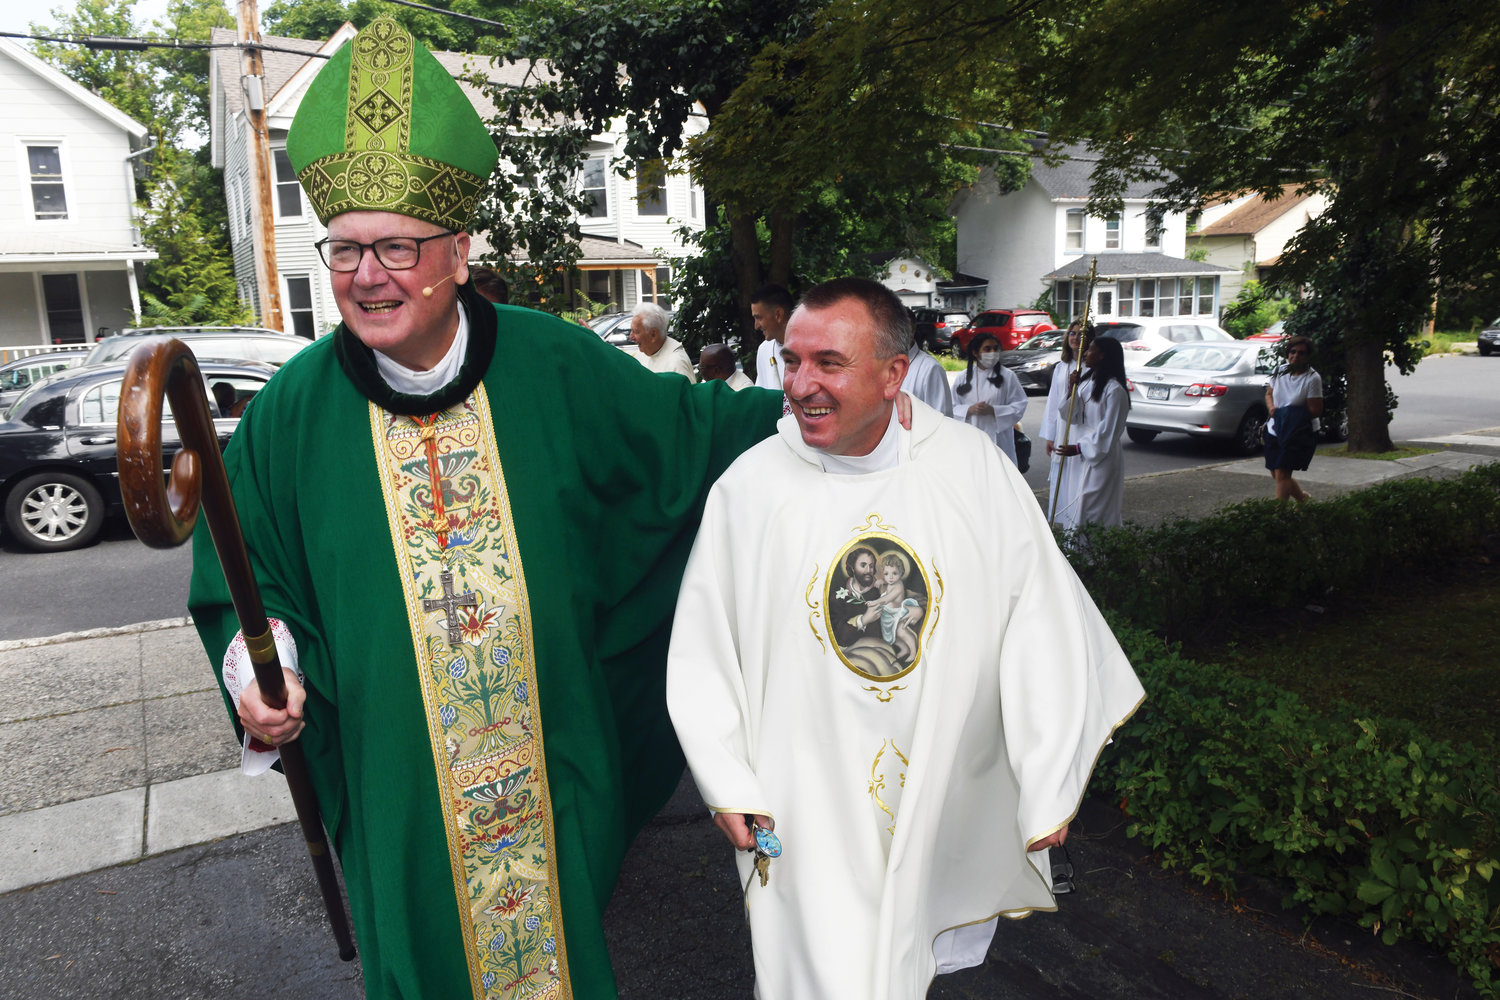 Cardinal Dolan and Father Miroslaw Pawlaczyk, pastor of Immaculate Conception parish in Kingston, walk to a reception following Sept. 4 Mass for the 125th anniversary of the parish church and the 25th anniversary of the adjacent Divine Mercy Perpetual Adoration Chapel.